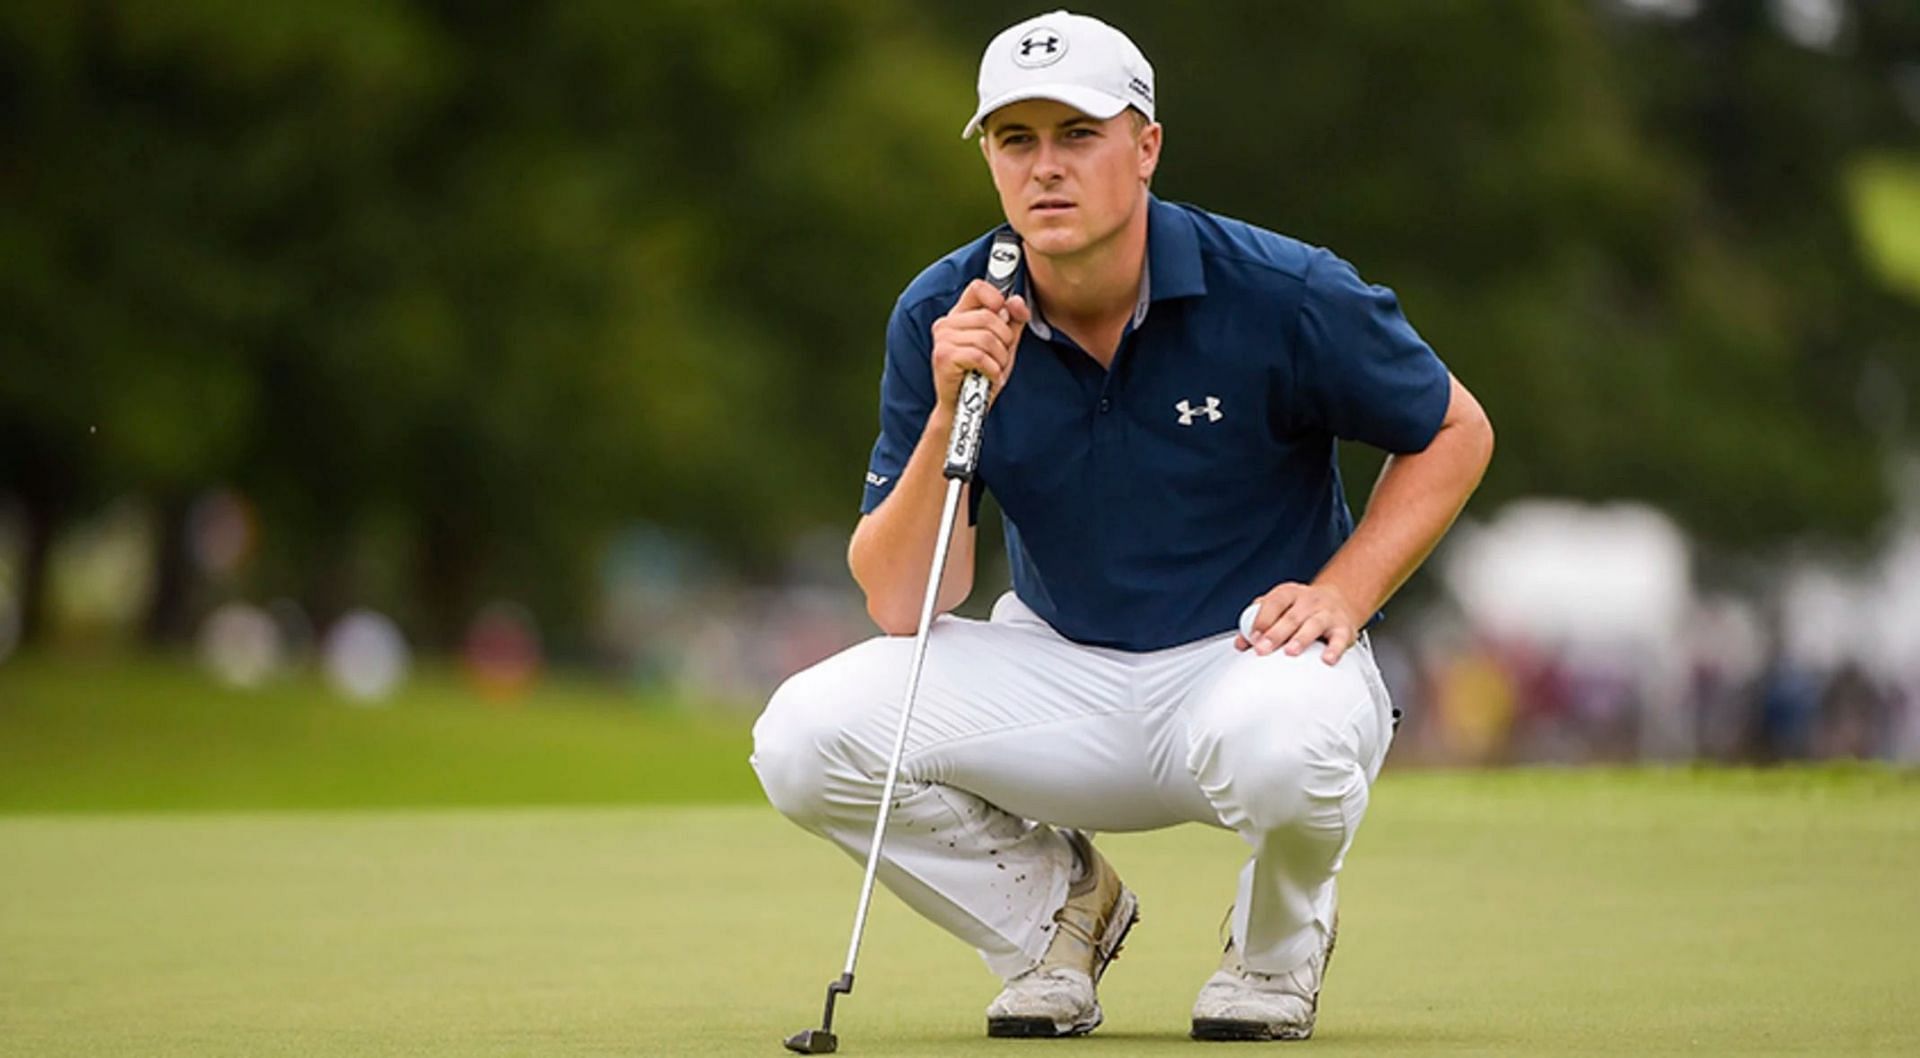 Spieth crashed out of Sony Open in a shocking way